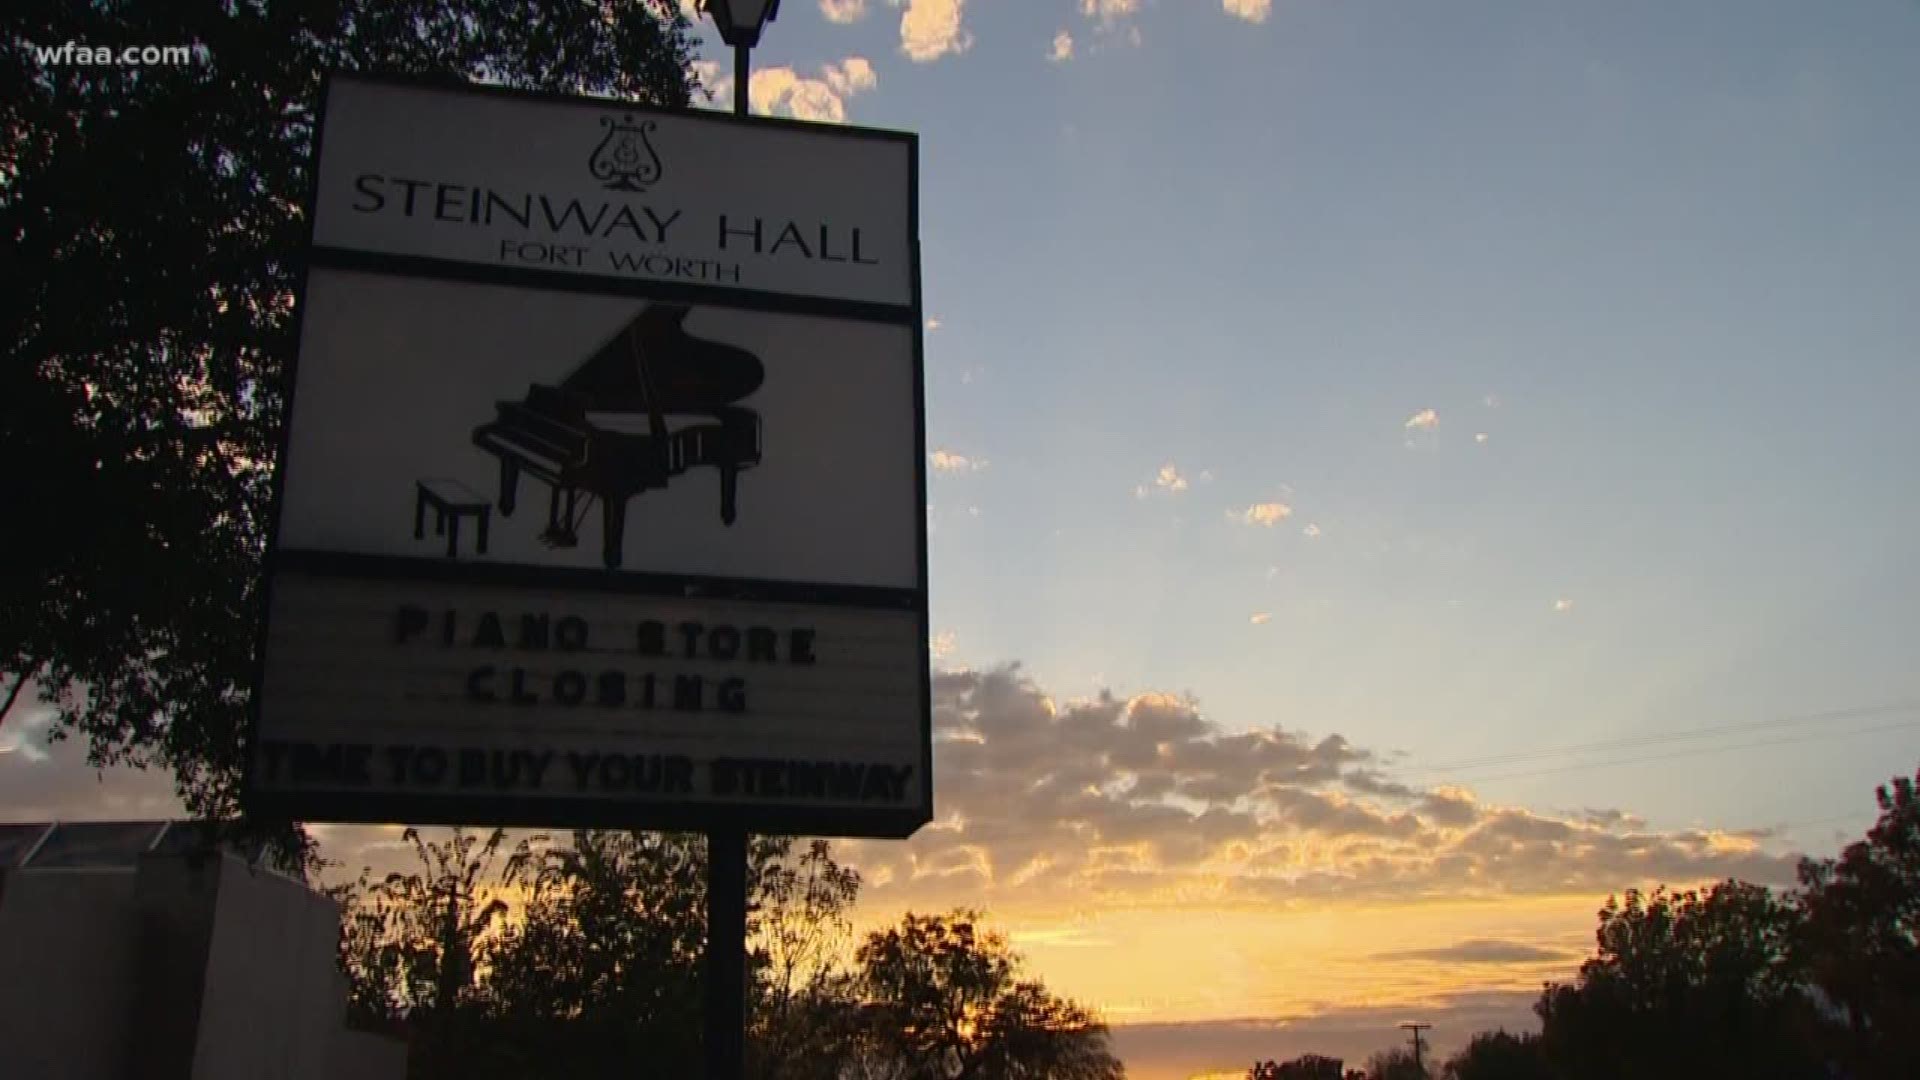 The landmark Fort Worth piano store Steinway Hall is closing. The shop was frequented by Van Cliburn.